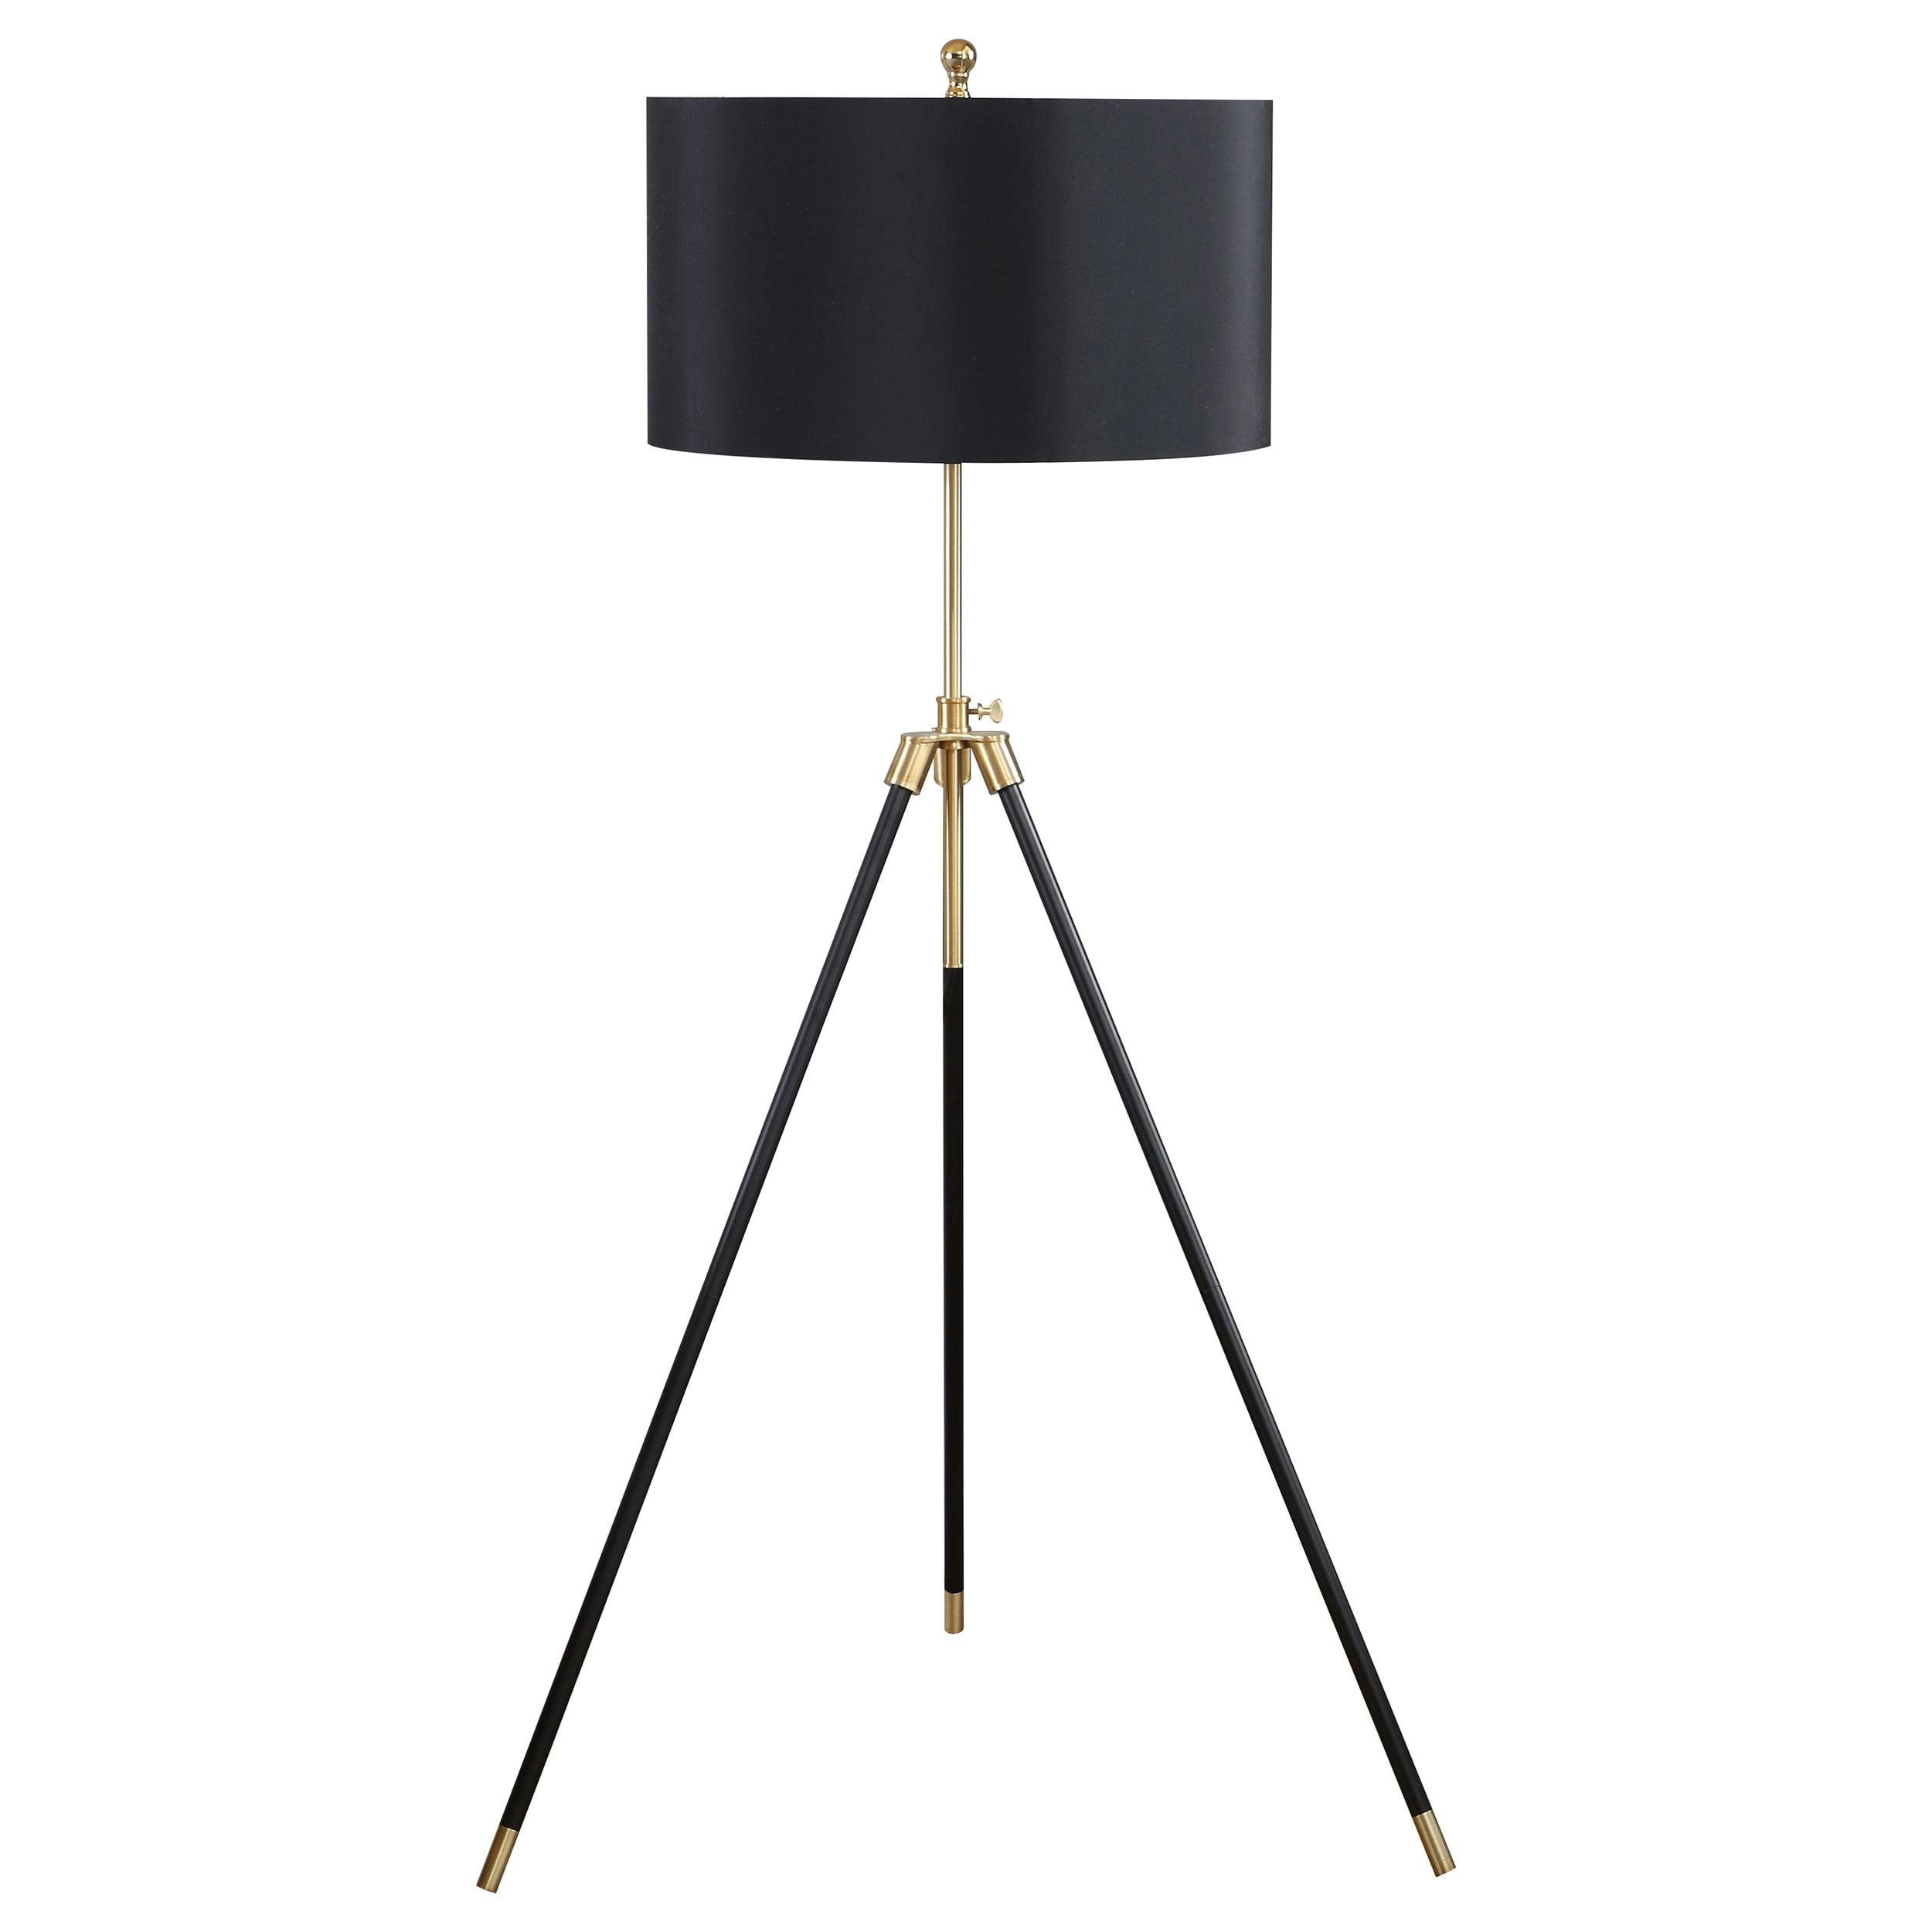 Elegant Black and Gold Tripod Floor Lamp with 3-Way Switch